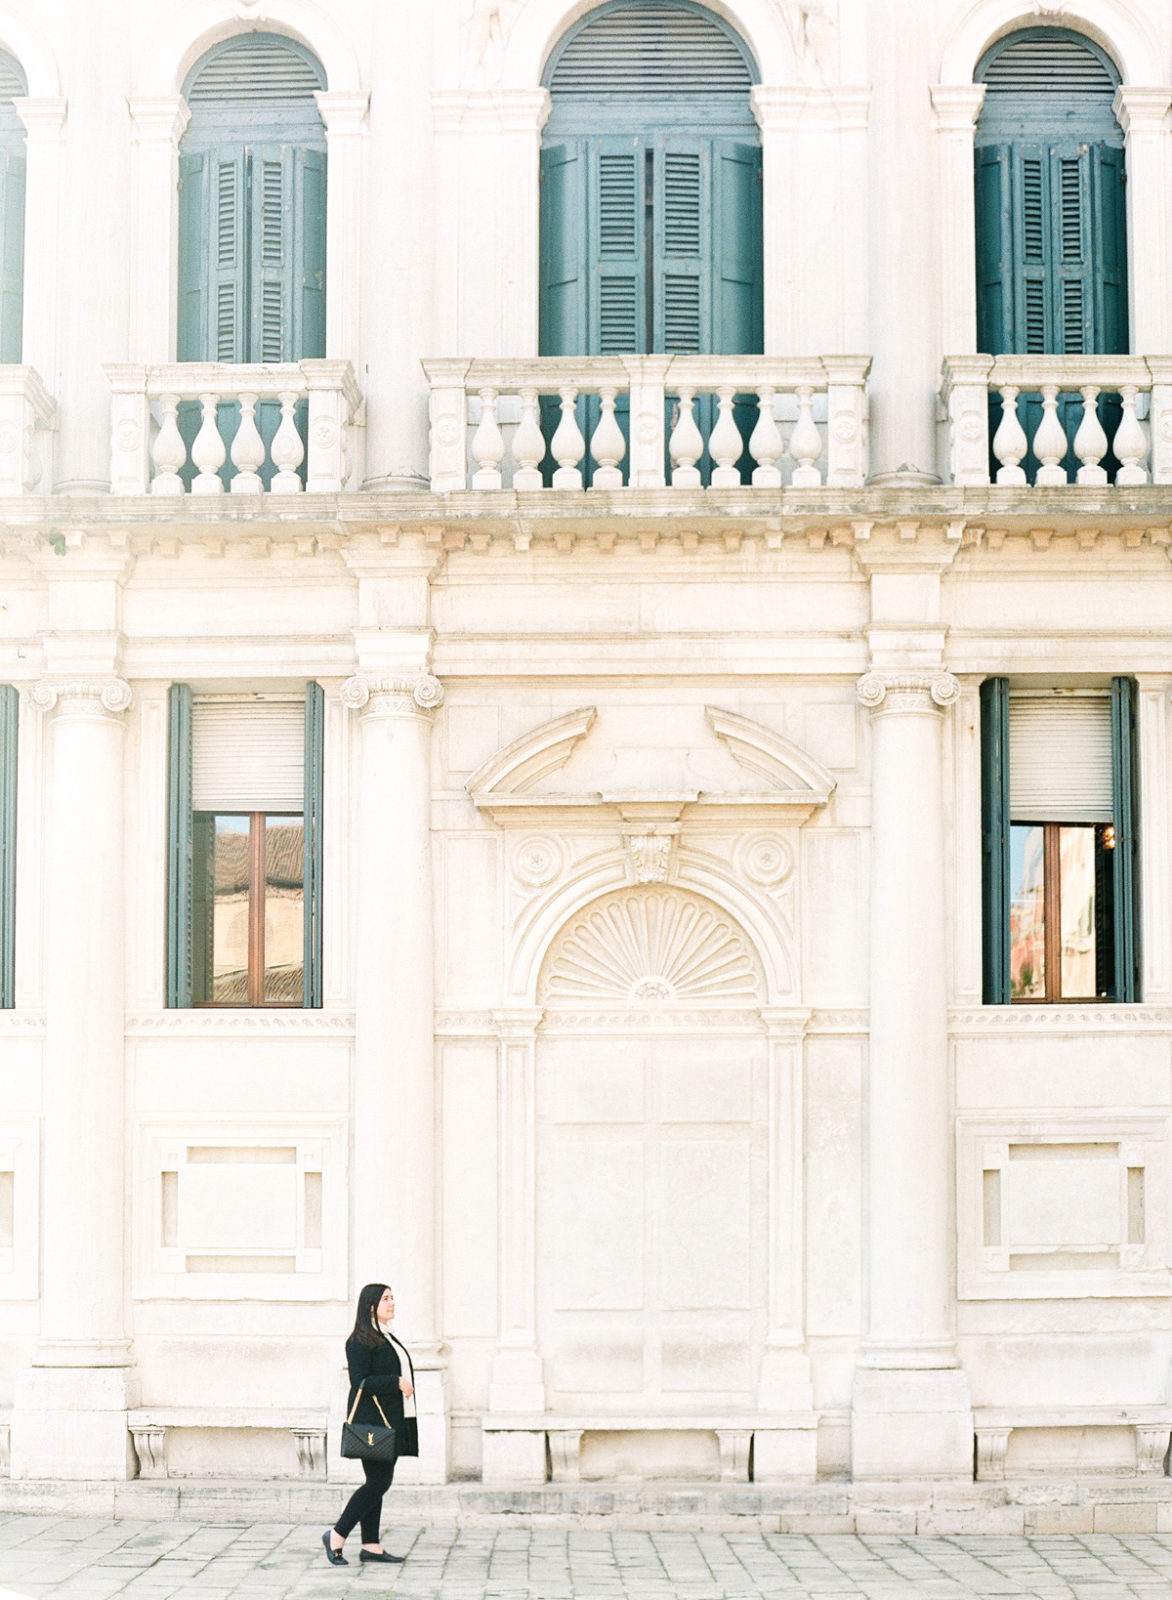 Venice Wedding Photographer | Italy Film Photography | Molly Carr Photography | Venice Architecture